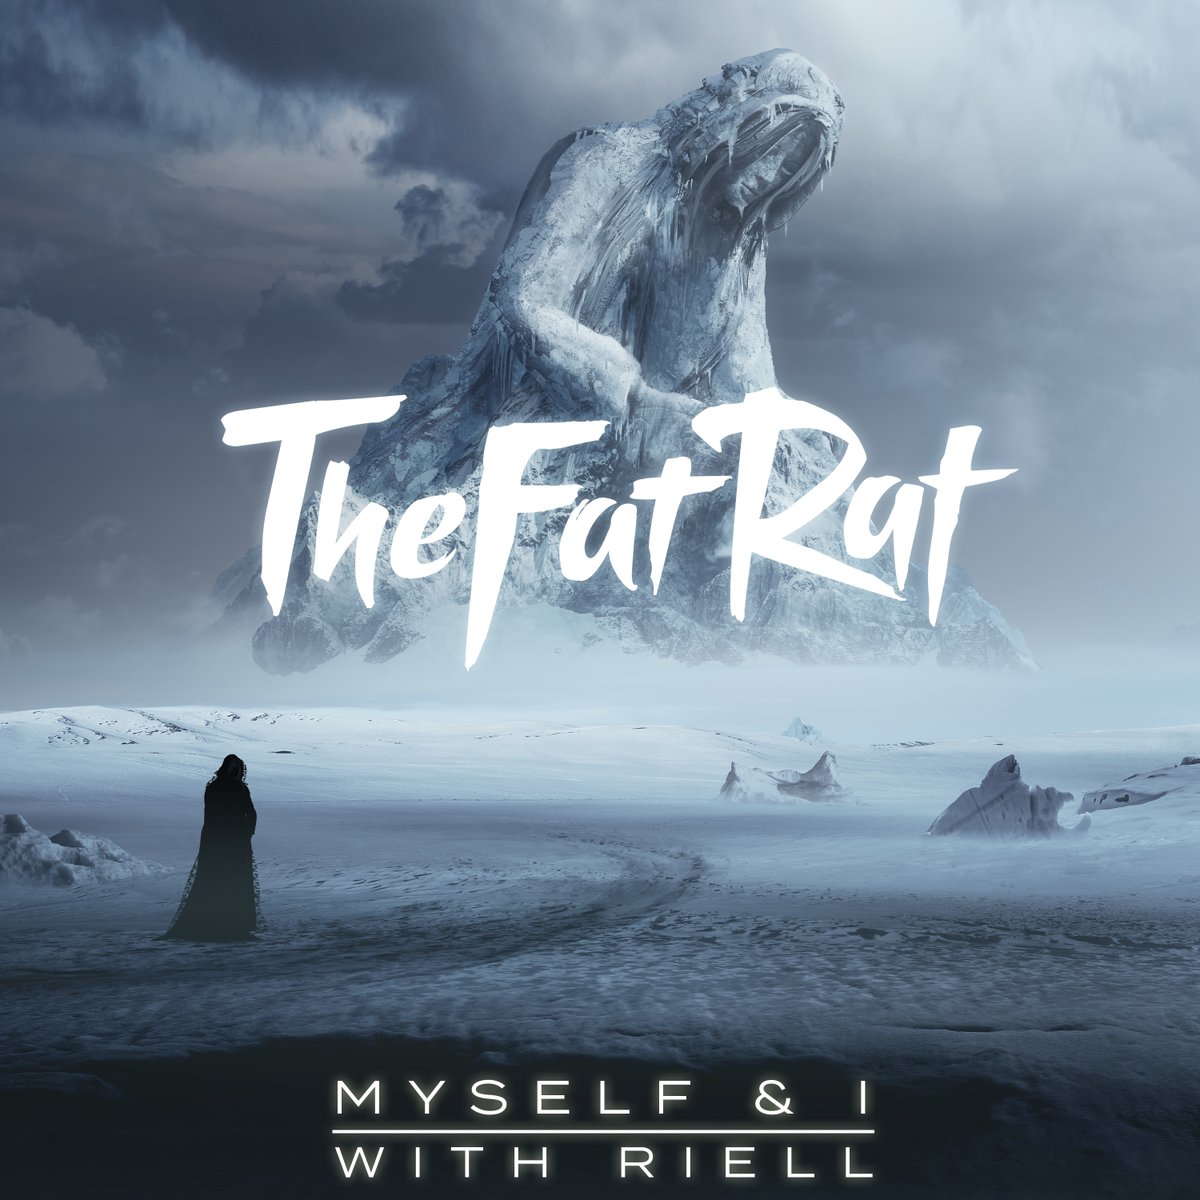 New song 'Myself & I' together with @ThisIsTheFatRat is coming April 26th! You can already Pre Save it here: riell.ffm.to/myself-i